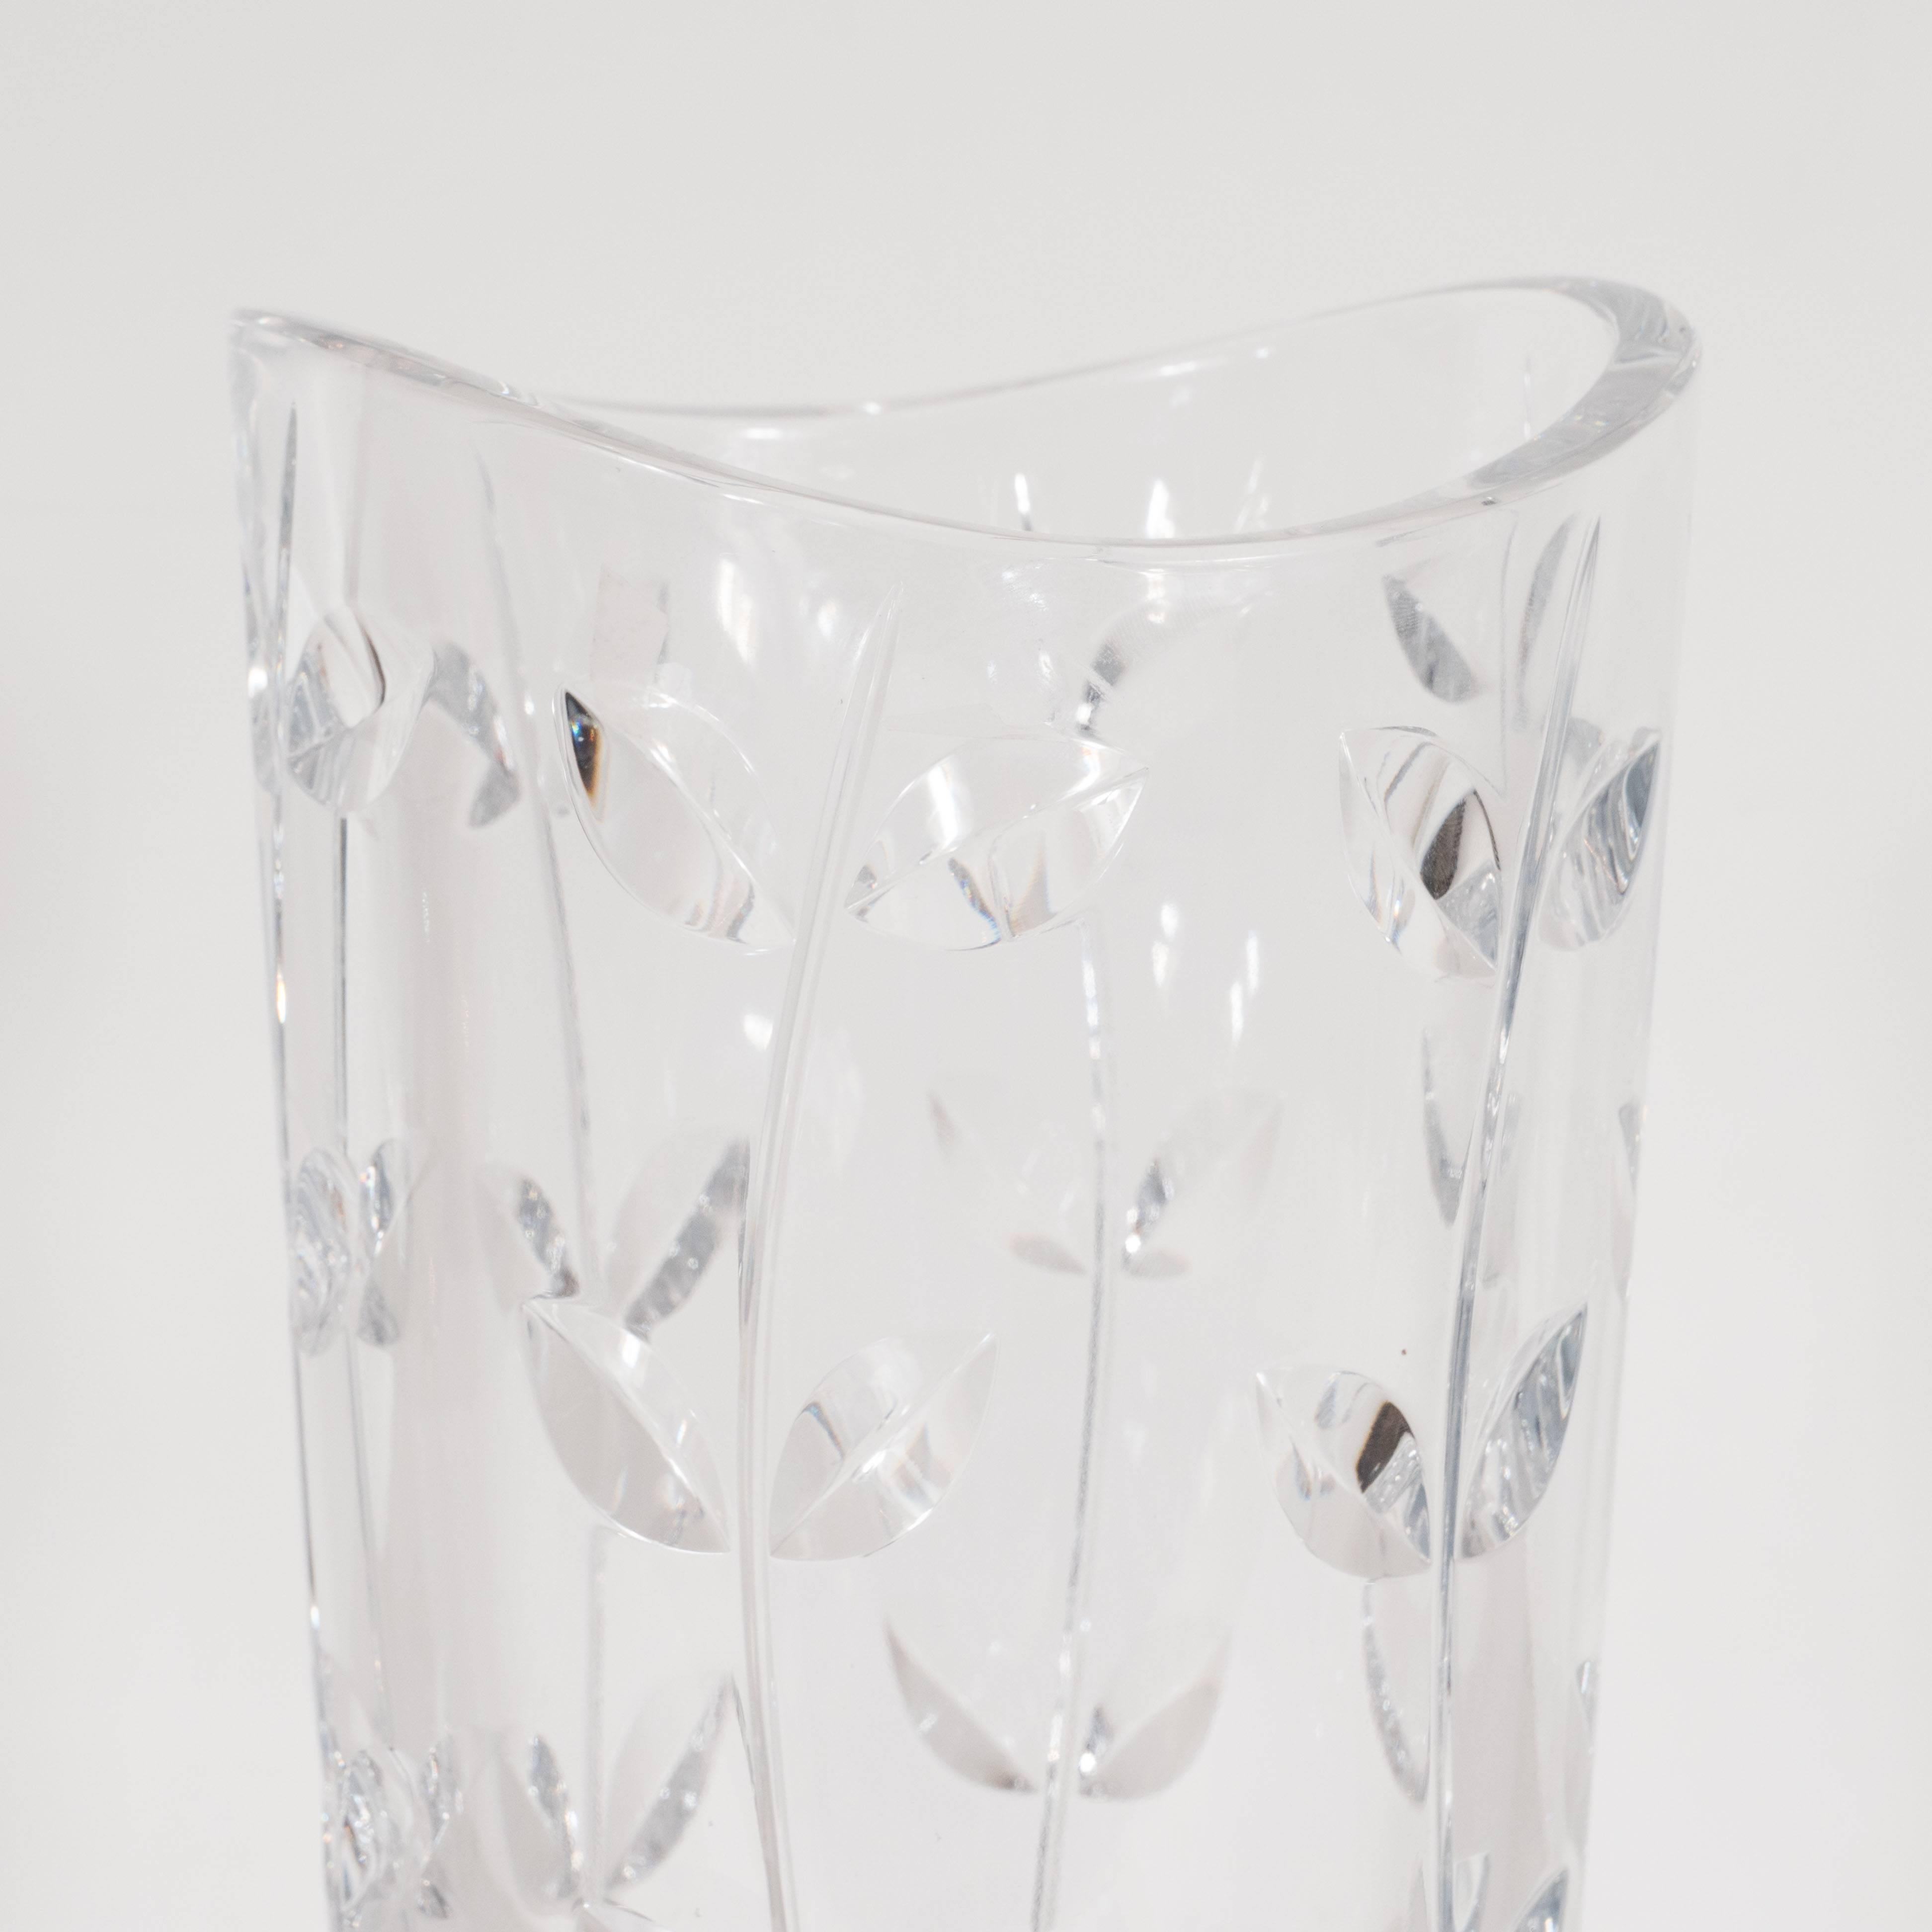 Etched Large Modernist Crystal Vase with Incised Foliate Patterns by Tiffany & Co.